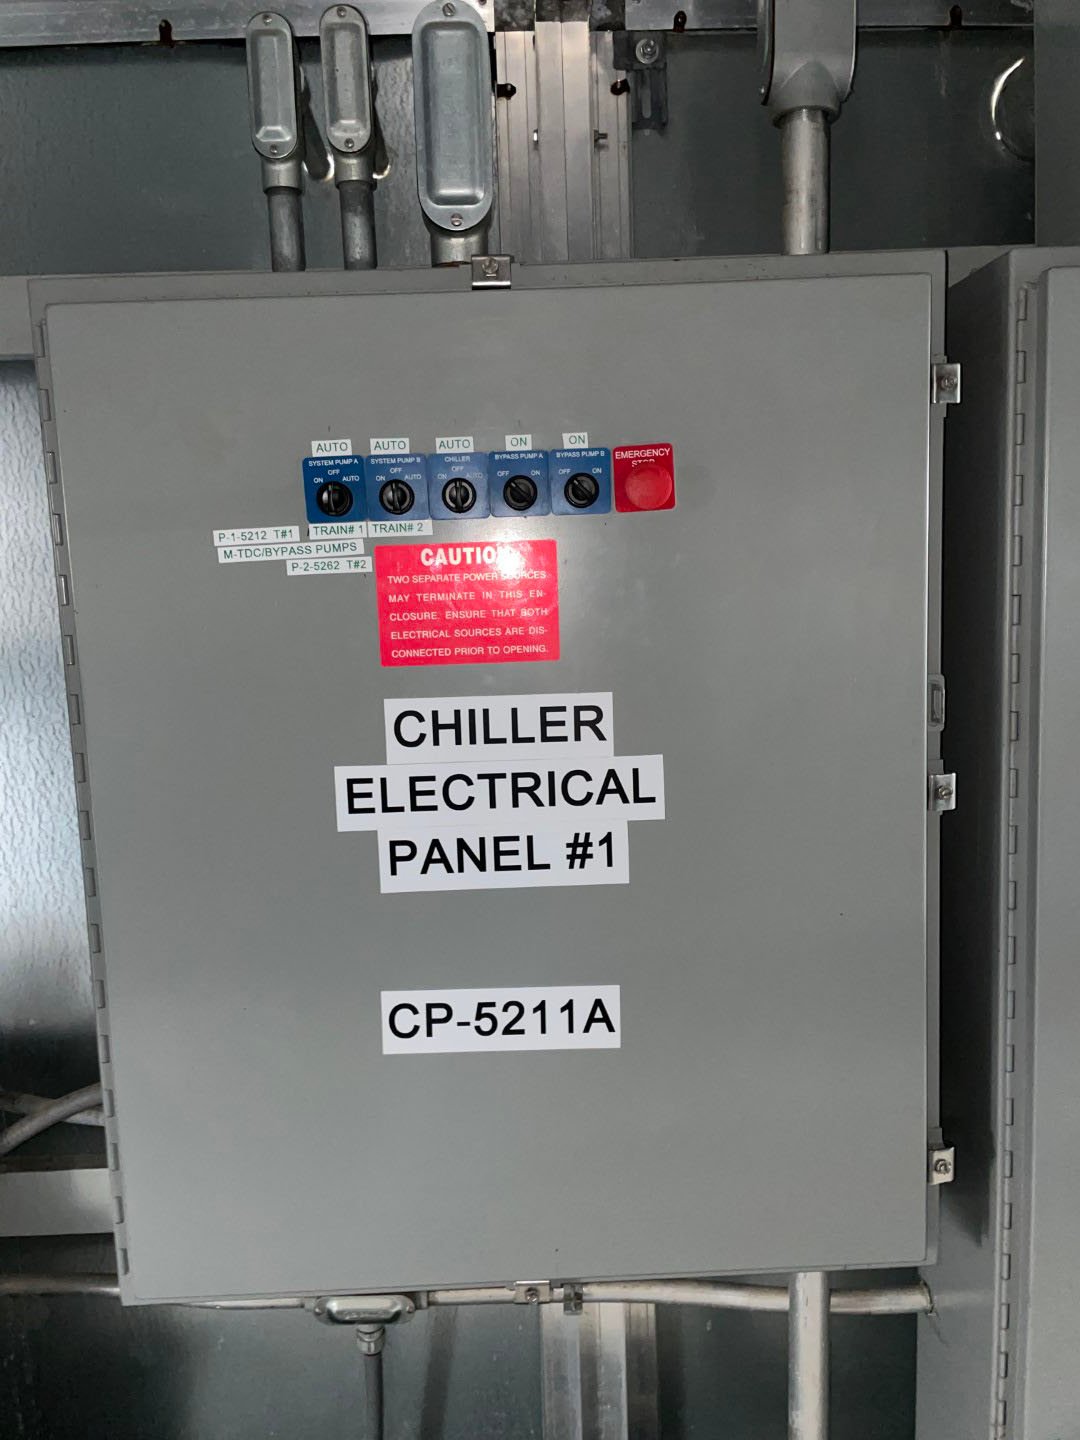 195 Ton Edwards Chiller, Model CE-210-A- 14ZB3, Air Cooled